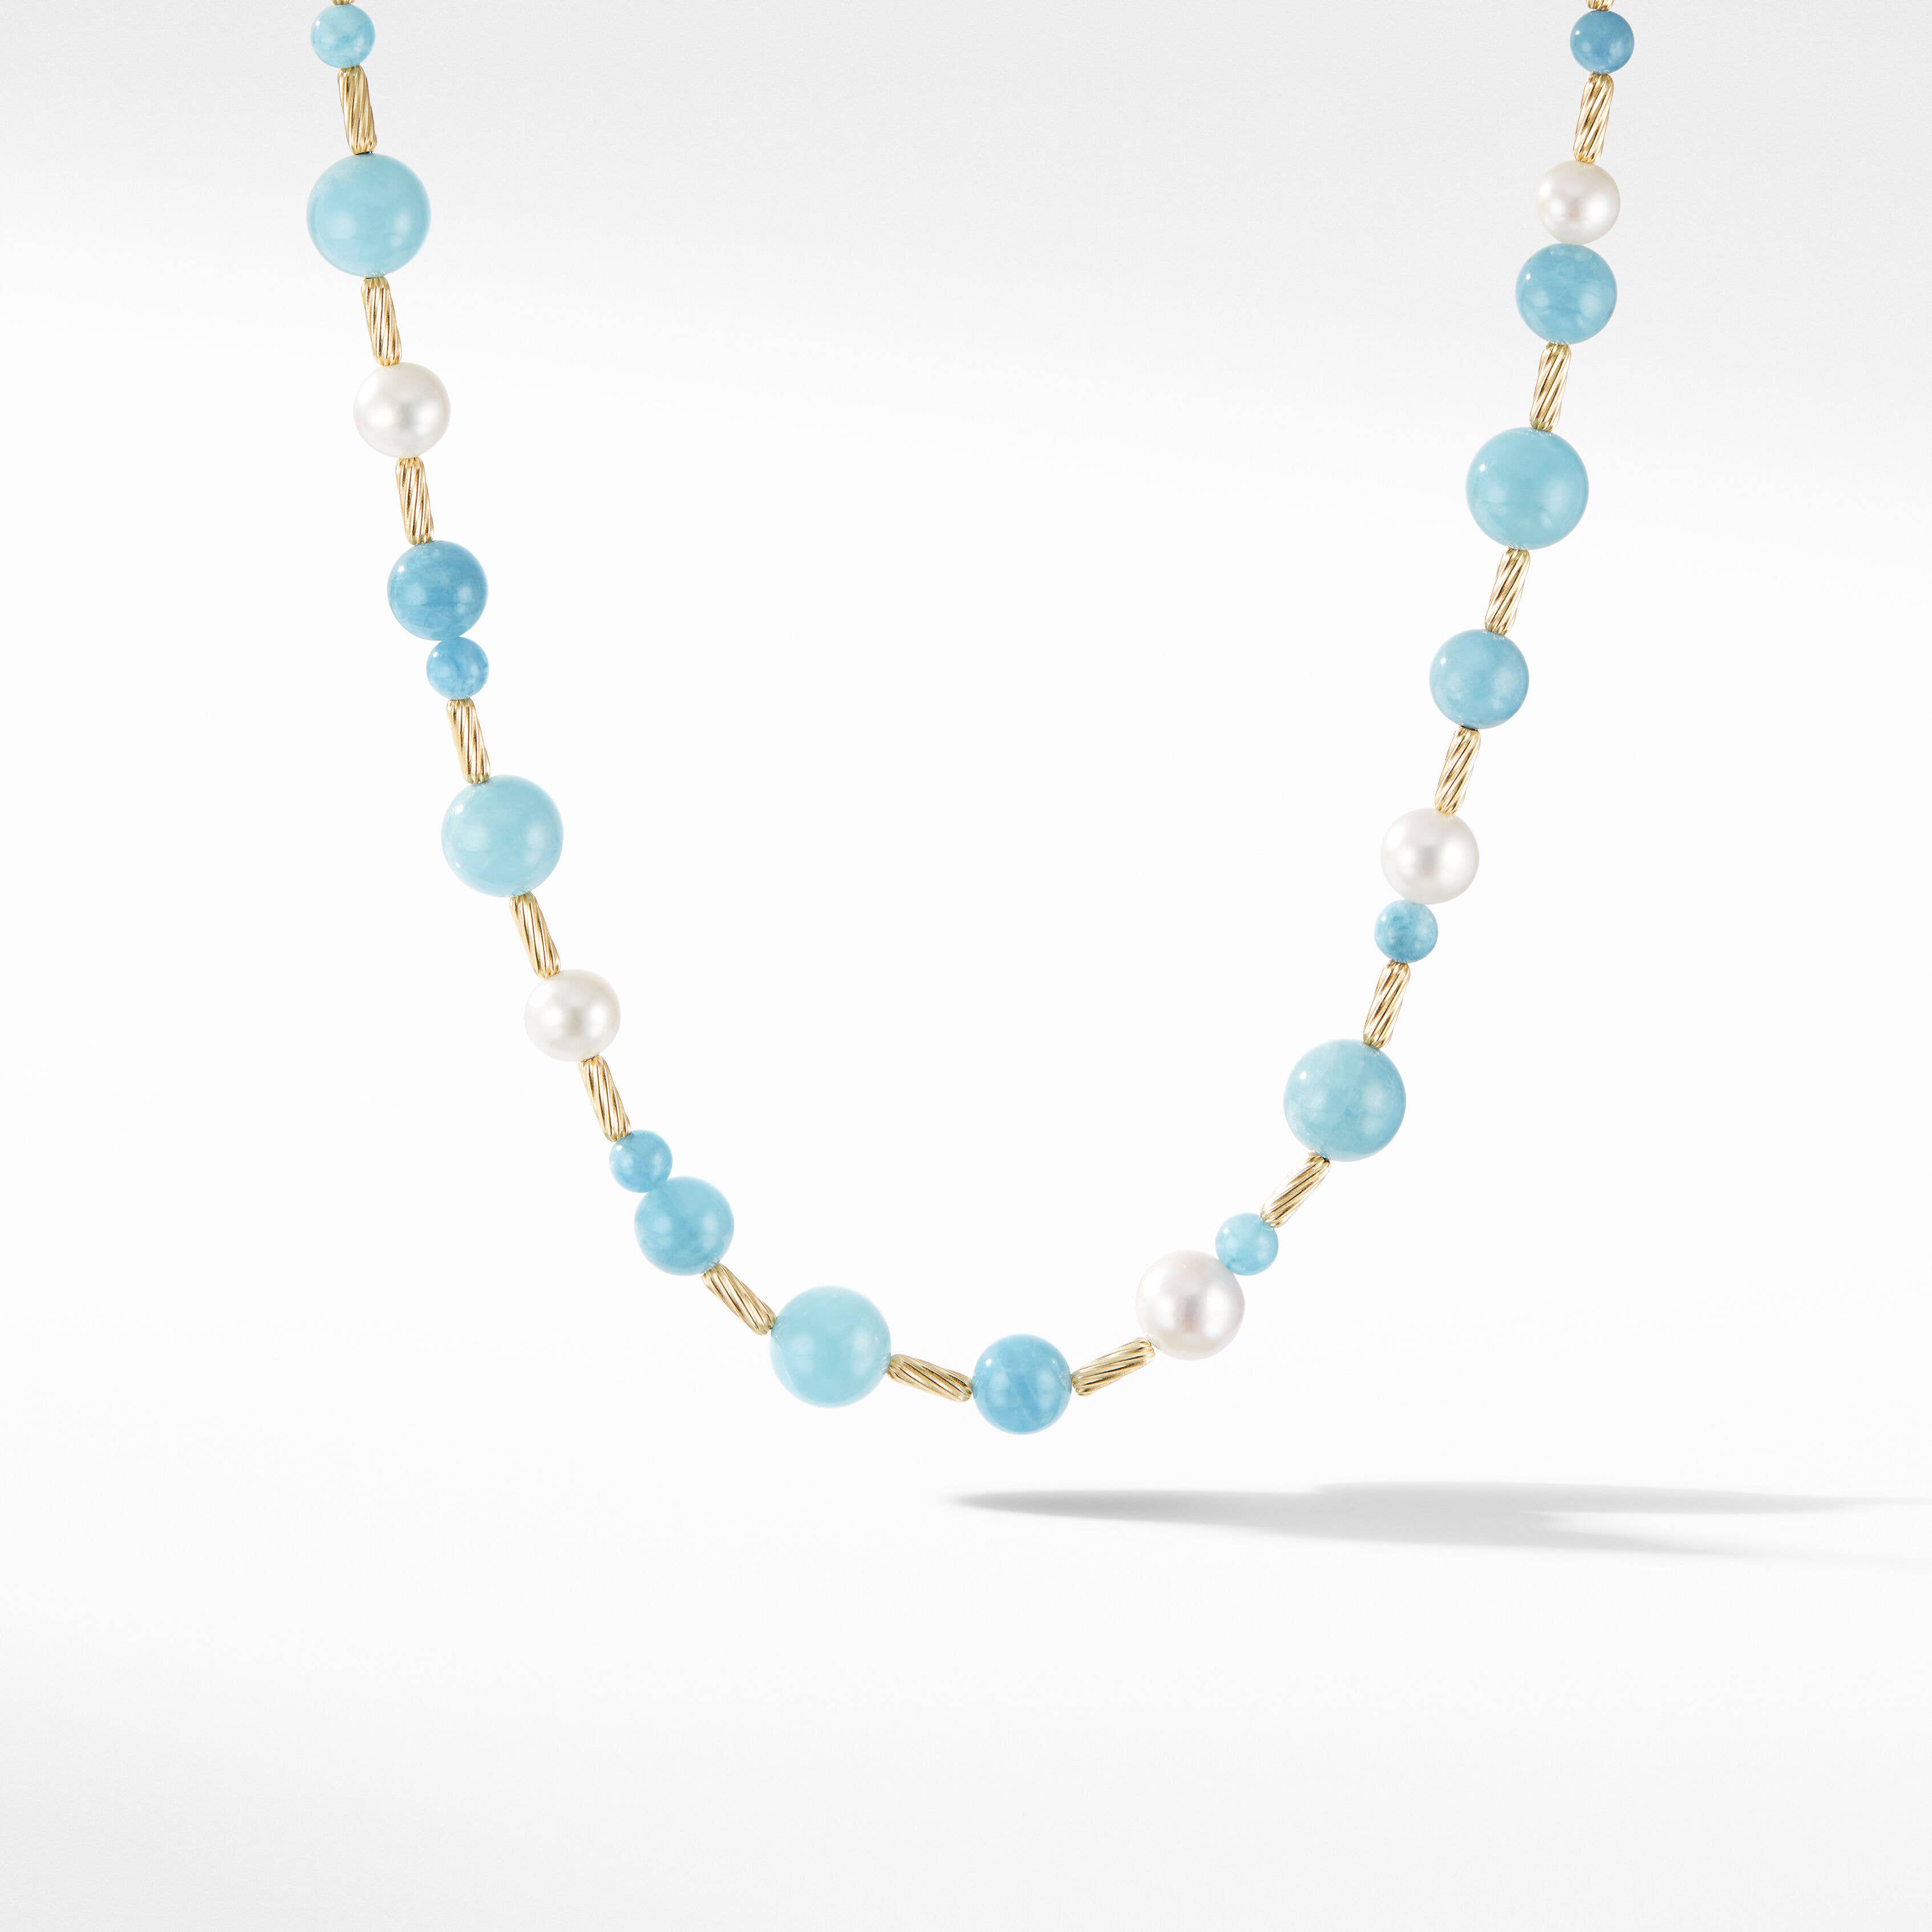 DY Signature Stick Necklace with 18K Yellow Gold, Aquamarine and Pearls